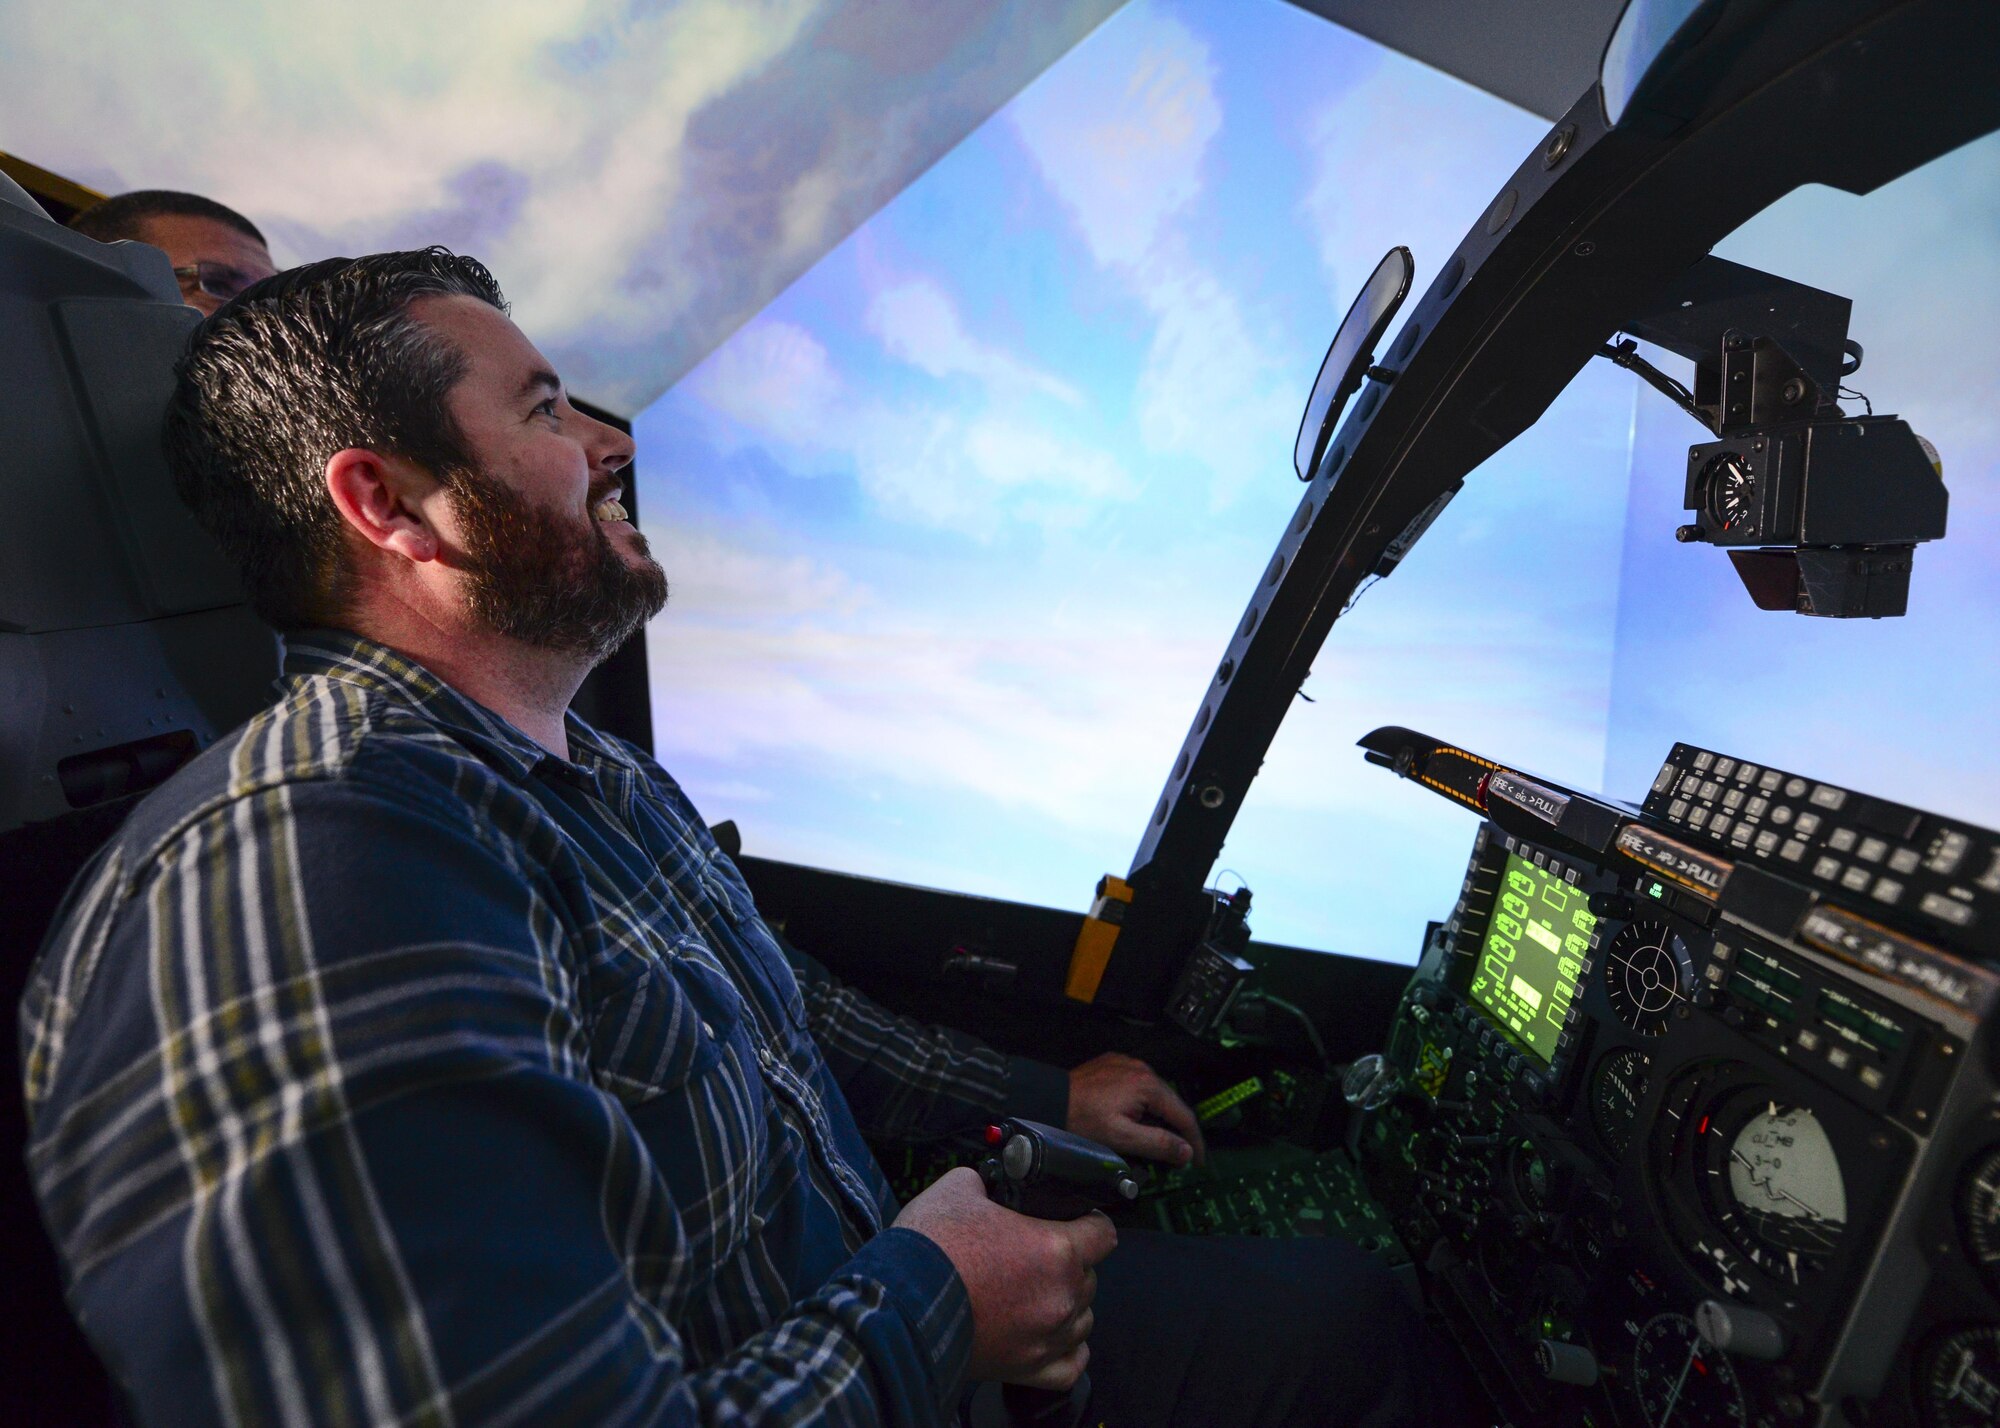 Marcus Foiles pilots an A-10 flight simulator during a tour at Davis-Monthan Air Force Base, Ariz., Jan. 27, 2017. Foiles was 10 years old in 1989 when he was granted a trip to D-M via the Make-A-Wish Foundation after being diagnosed with leukemia. Foiles made the trip back to D-M this past January and was able to pilot a flight simulator that was generations ahead of the one he flew in 1989. (U.S. Air Force photo by Airman 1st Class Nathan H. Barbour)